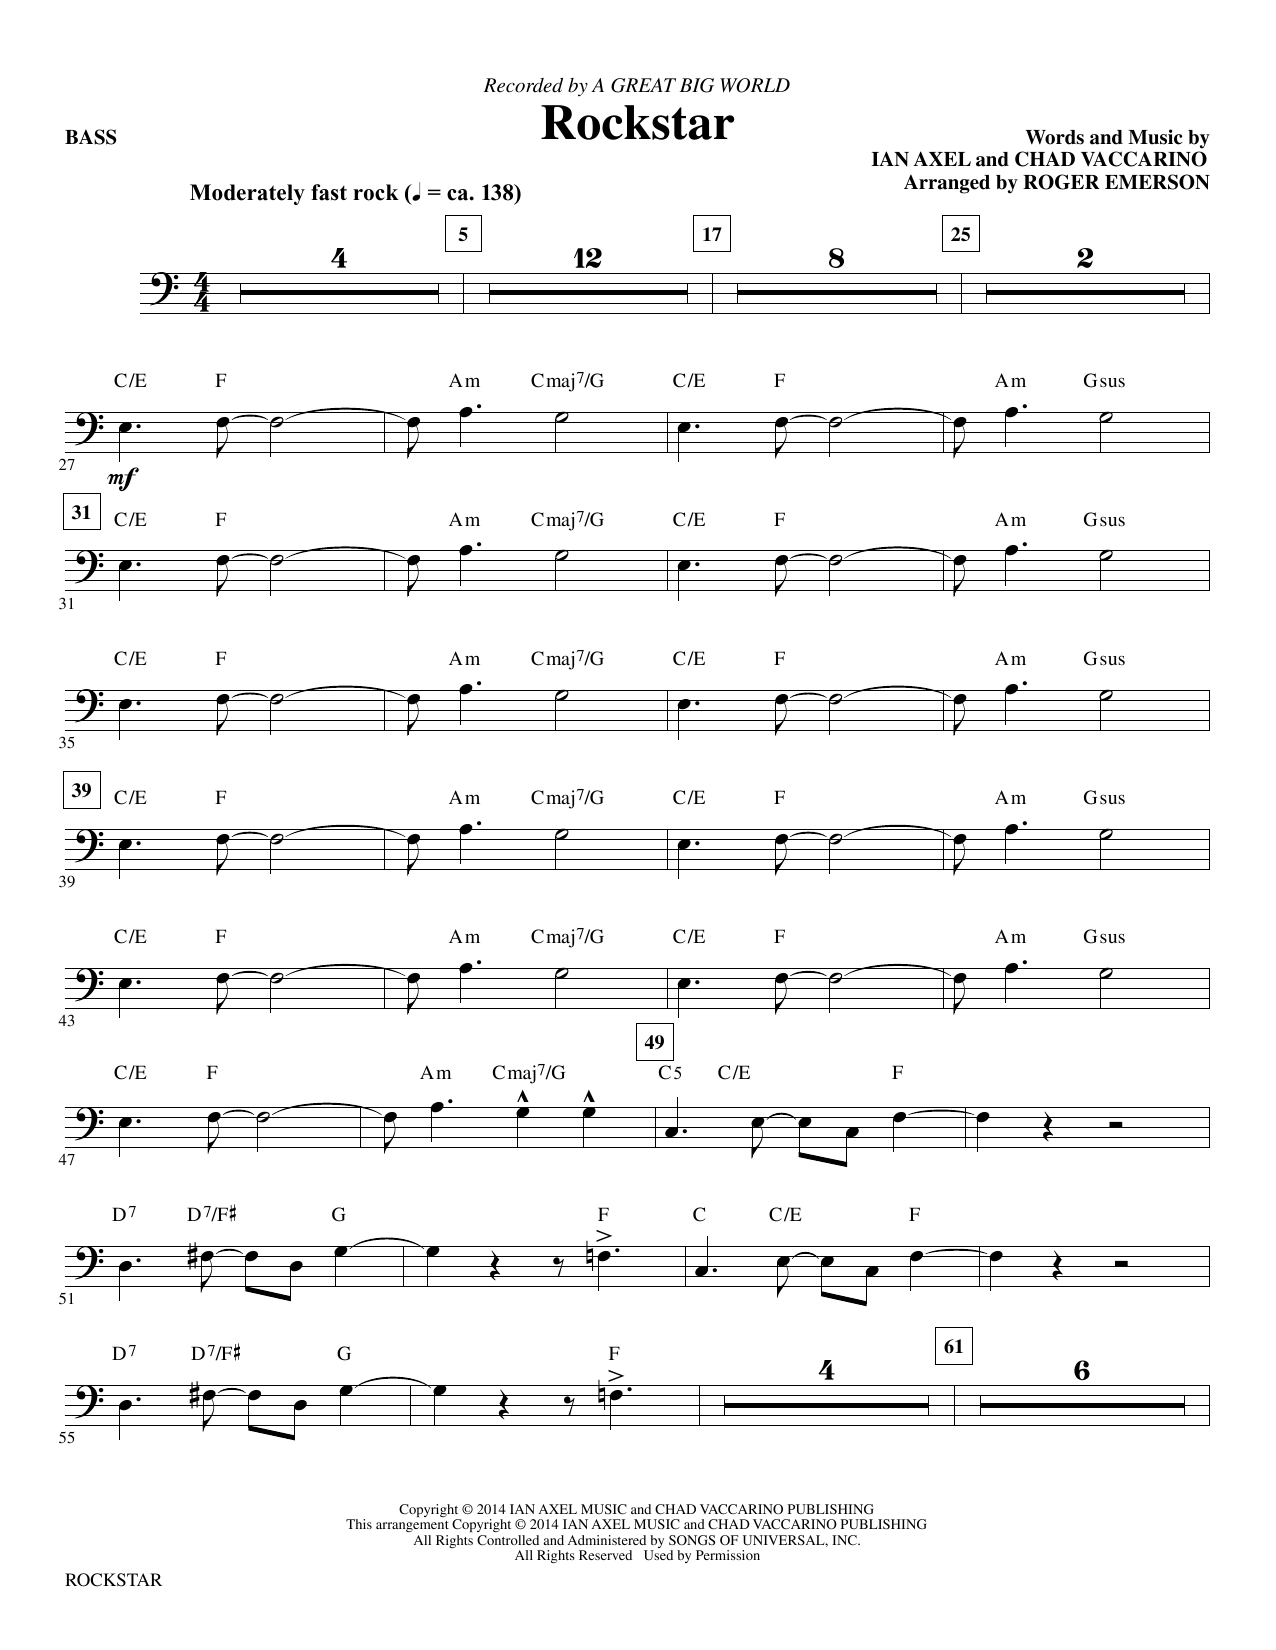 A Great Big World Rockstar (arr. Roger Emerson) - Bass sheet music notes and chords. Download Printable PDF.